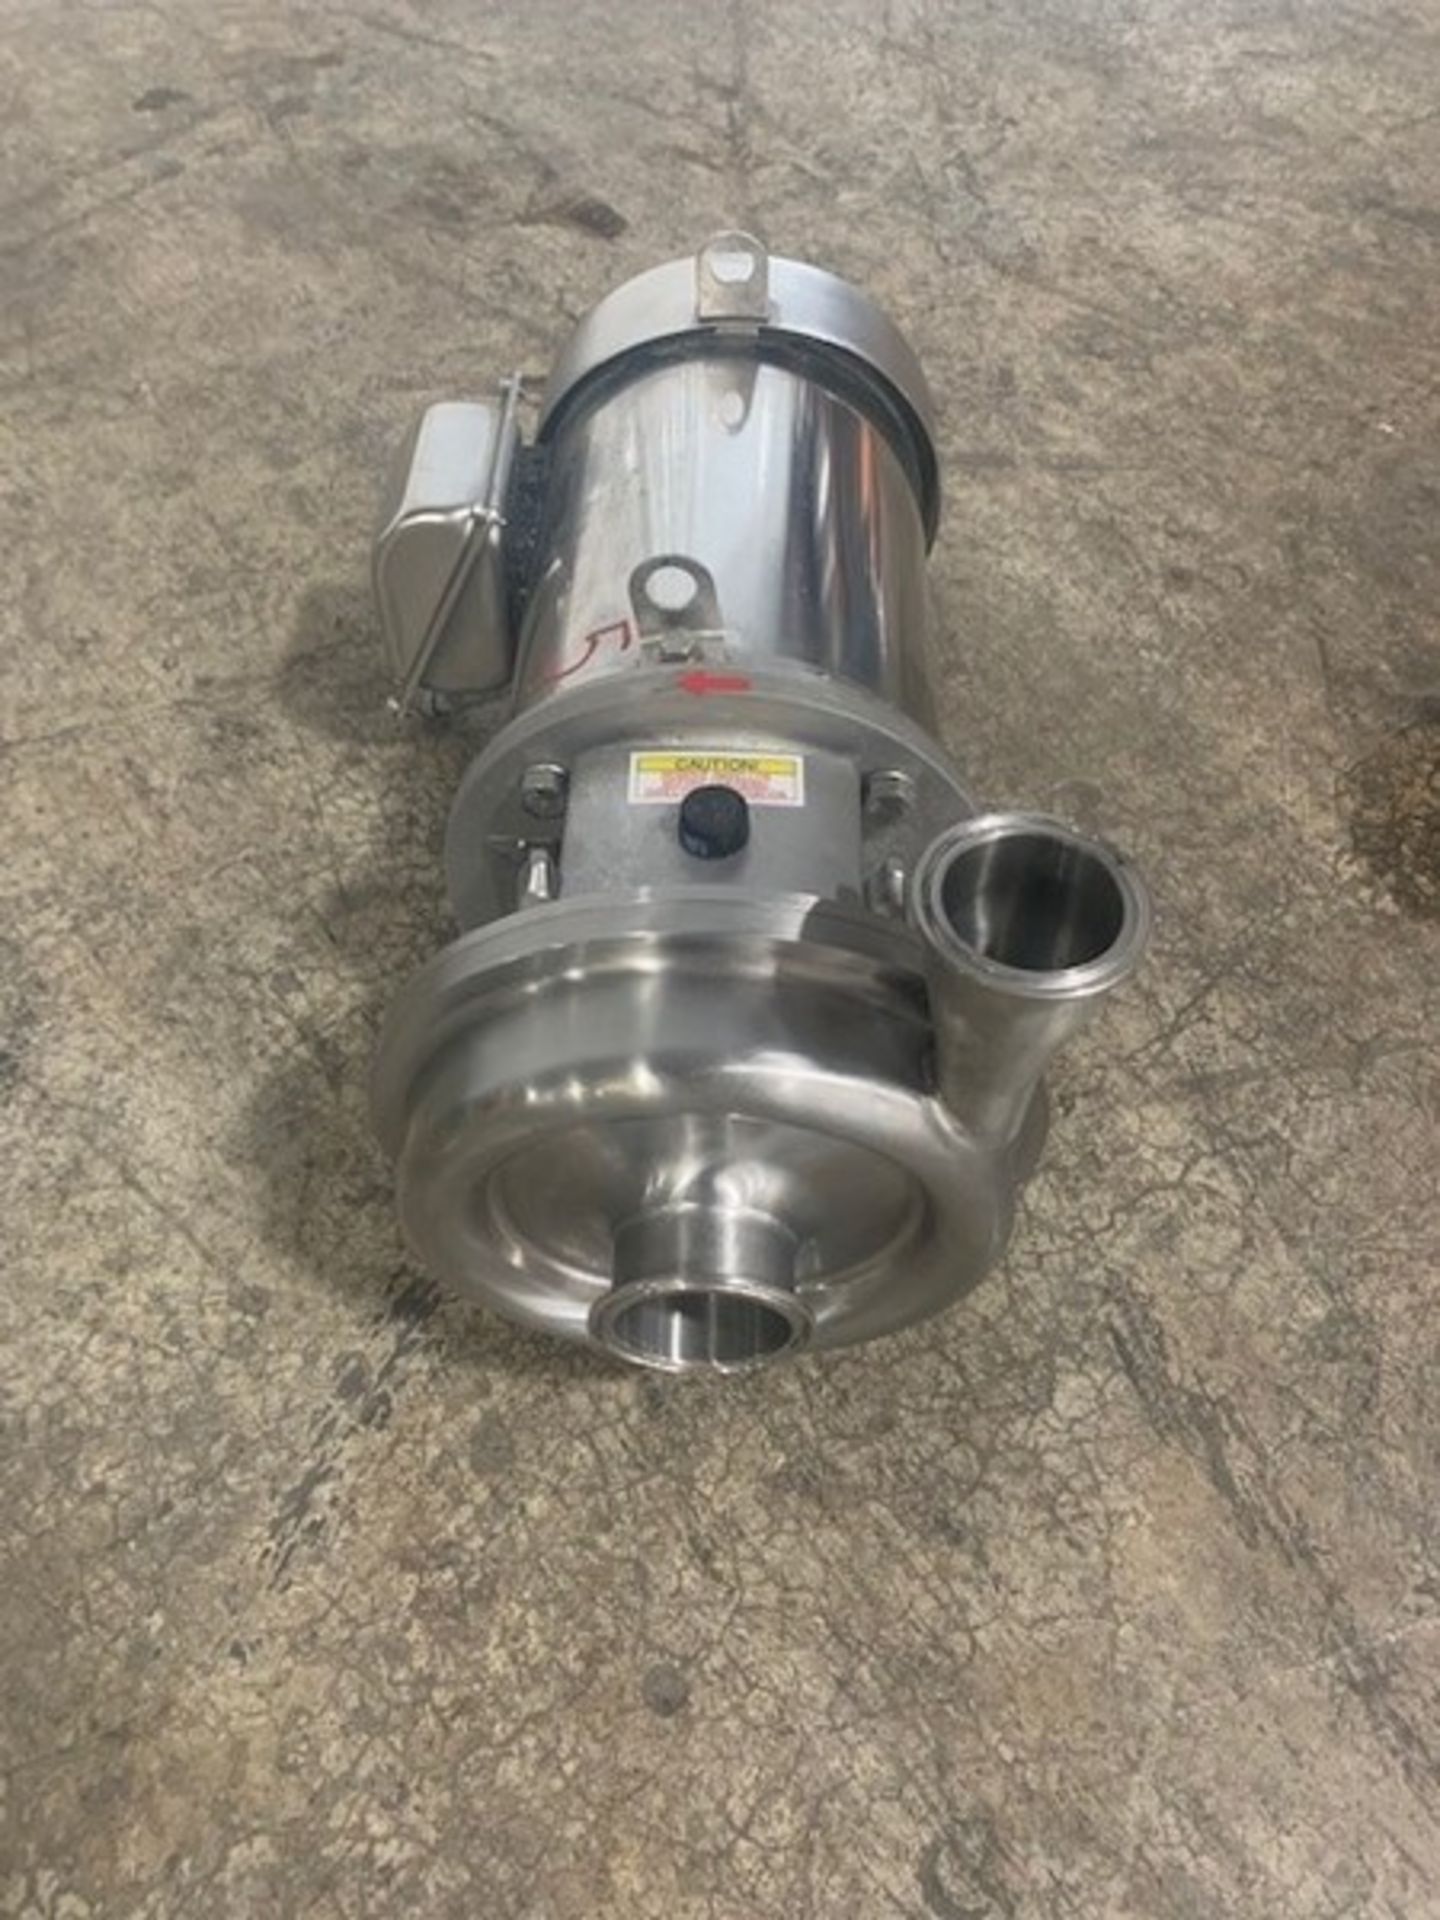 2x2.5 Alfa laval LKH15 all stainless centrifugal pump with a 3hp sterling motor with 3490 rpm ($50 - Image 2 of 5